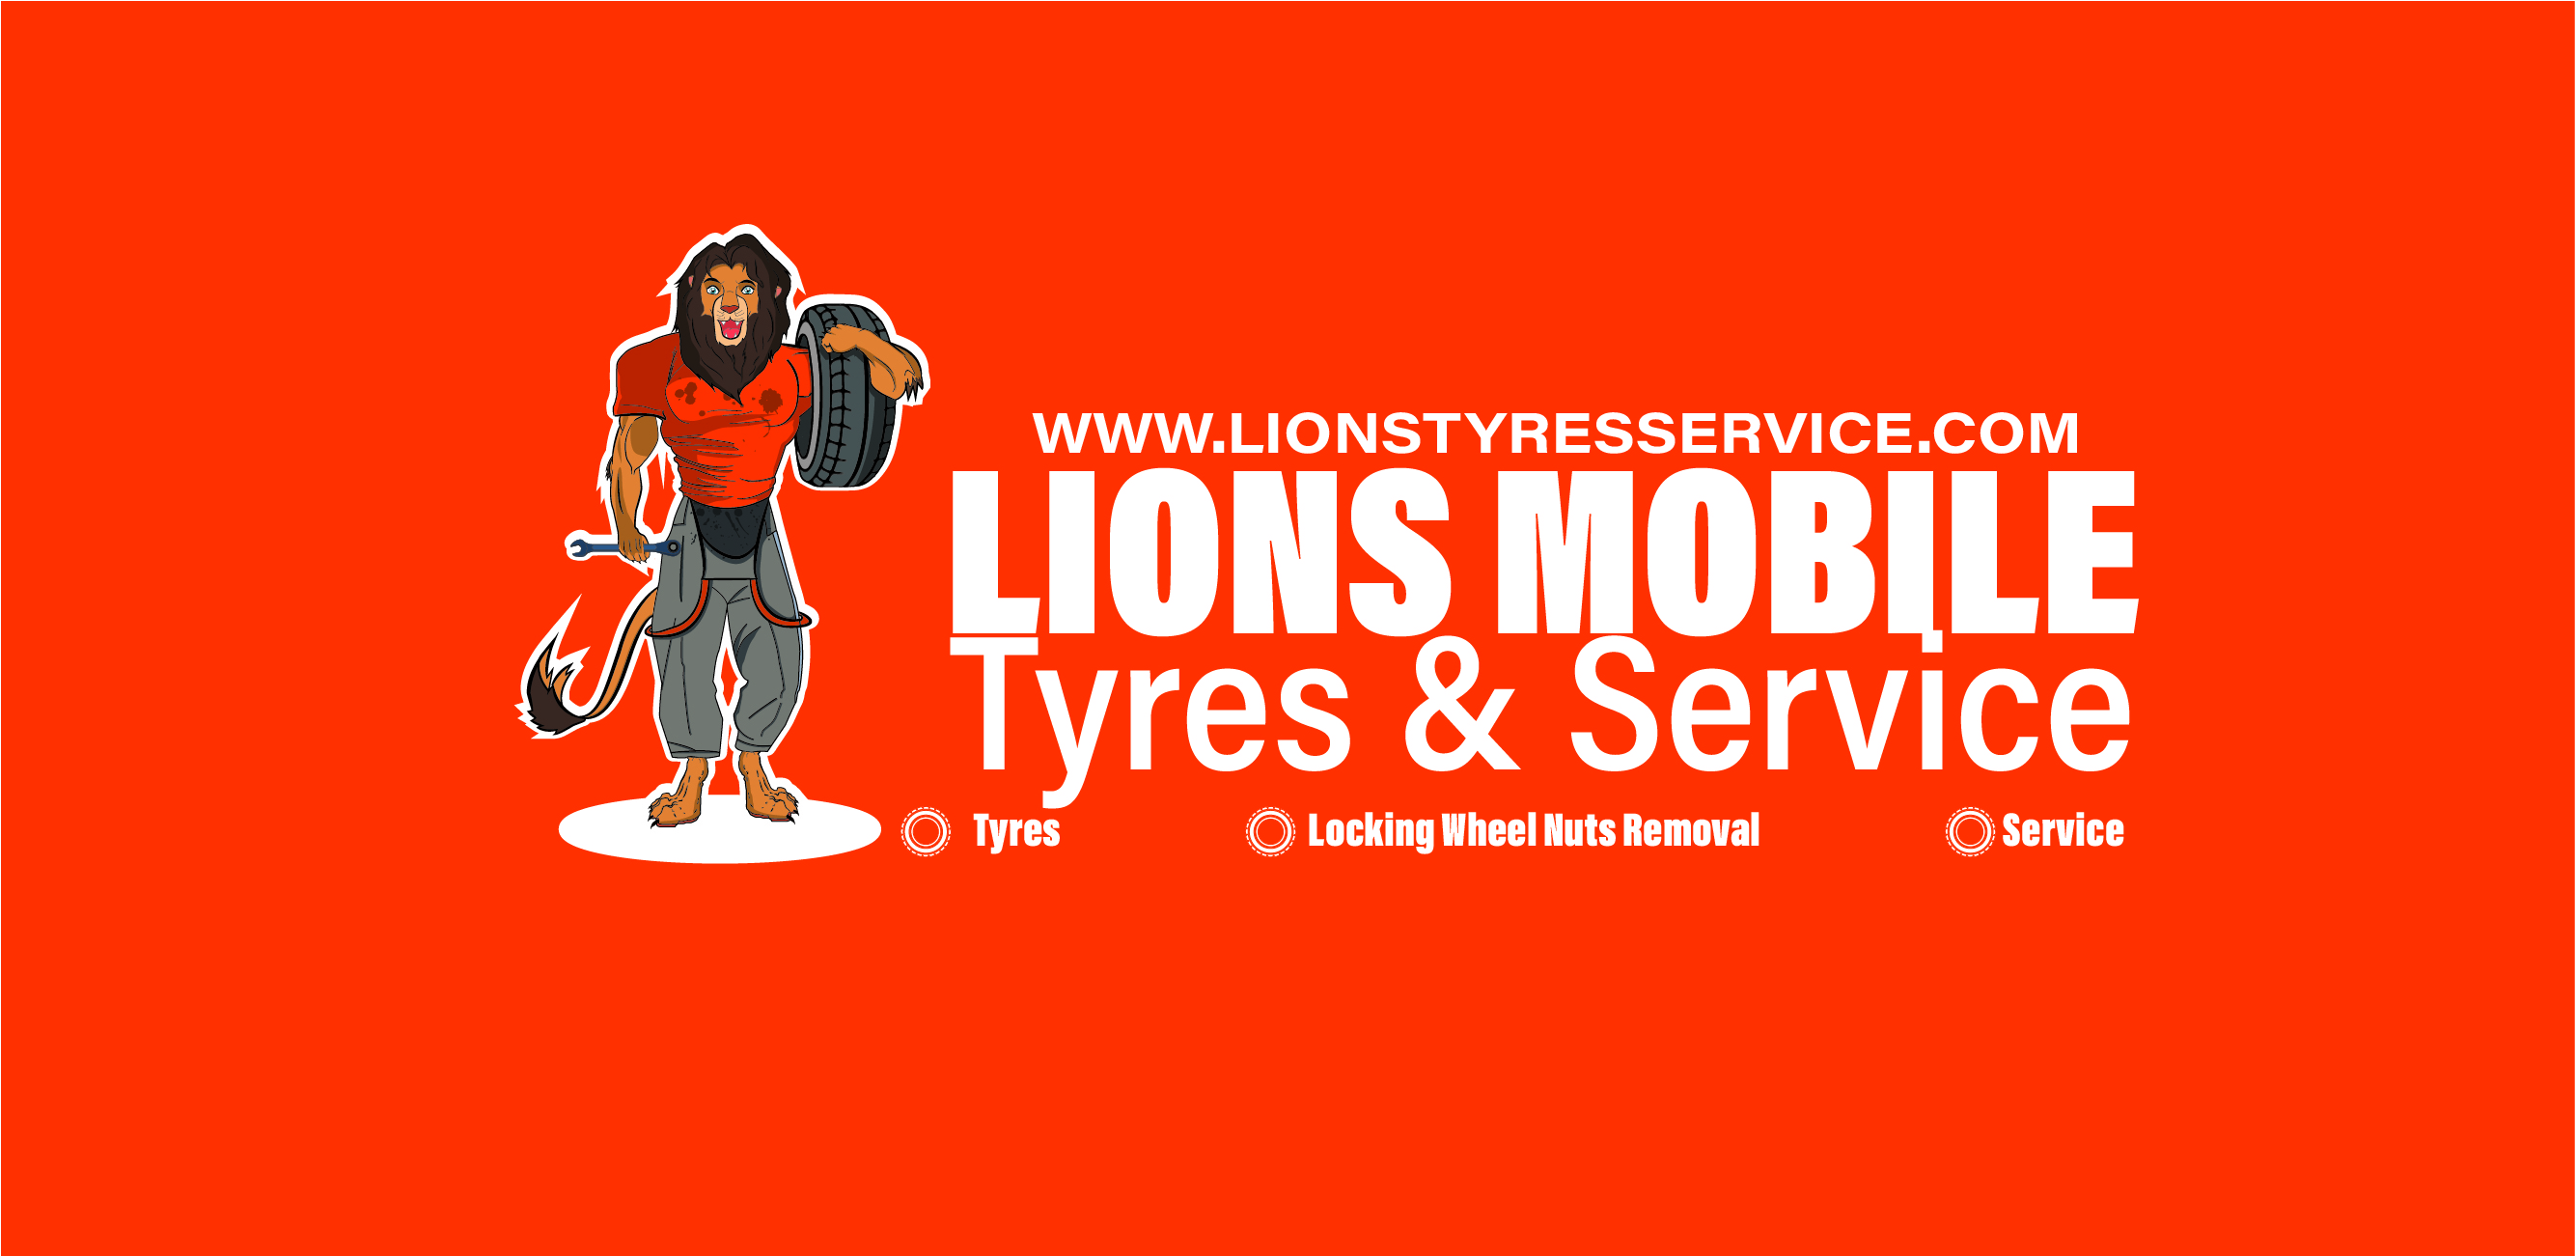 Logo of Mobile Tyres Services by Lions Mobile Tyres Service